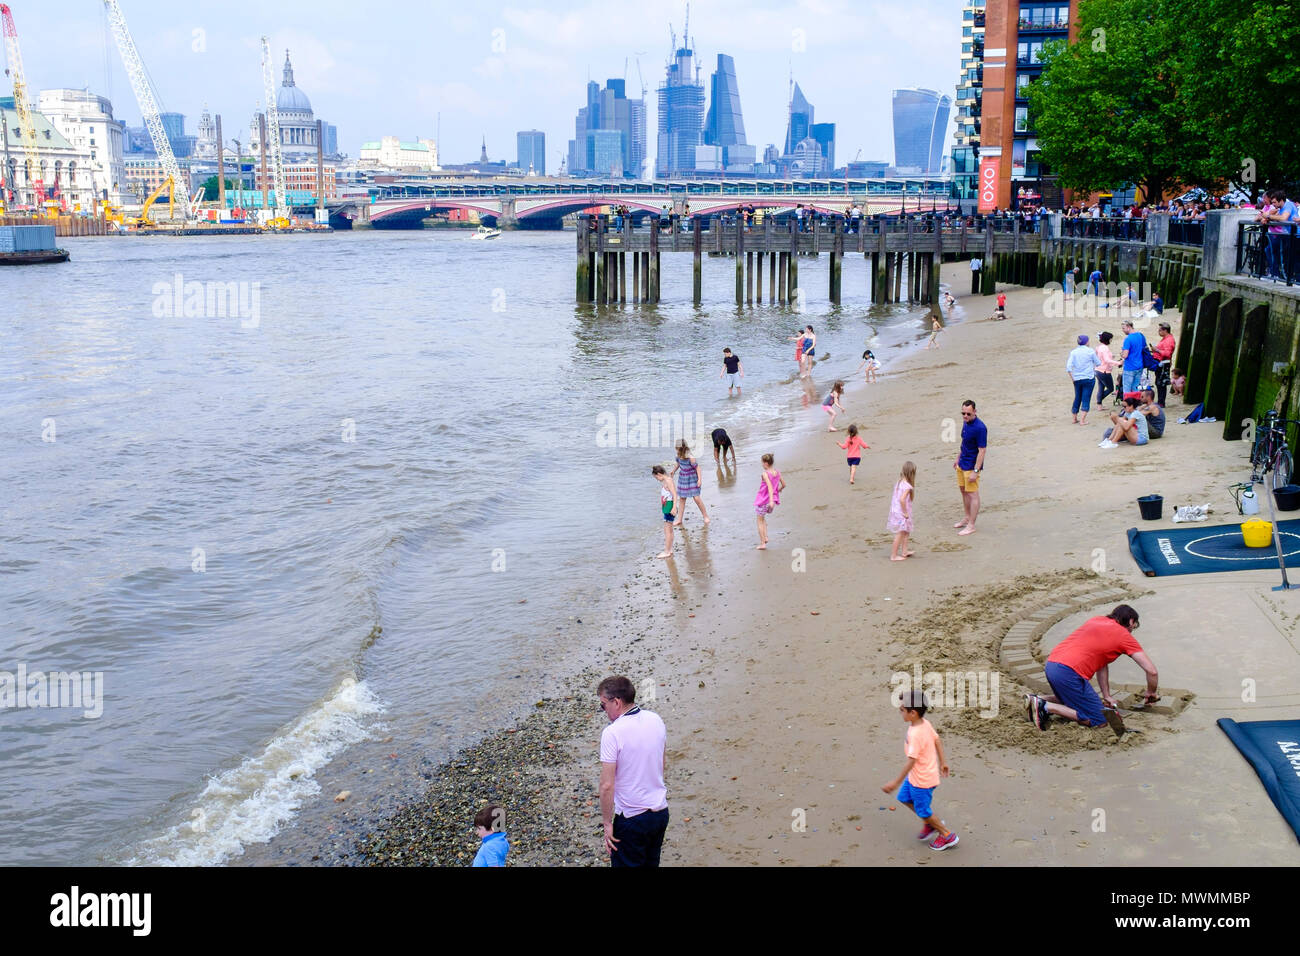 People enjoying the sandy beach of River Thames foreshore at low tide. Stock Photo